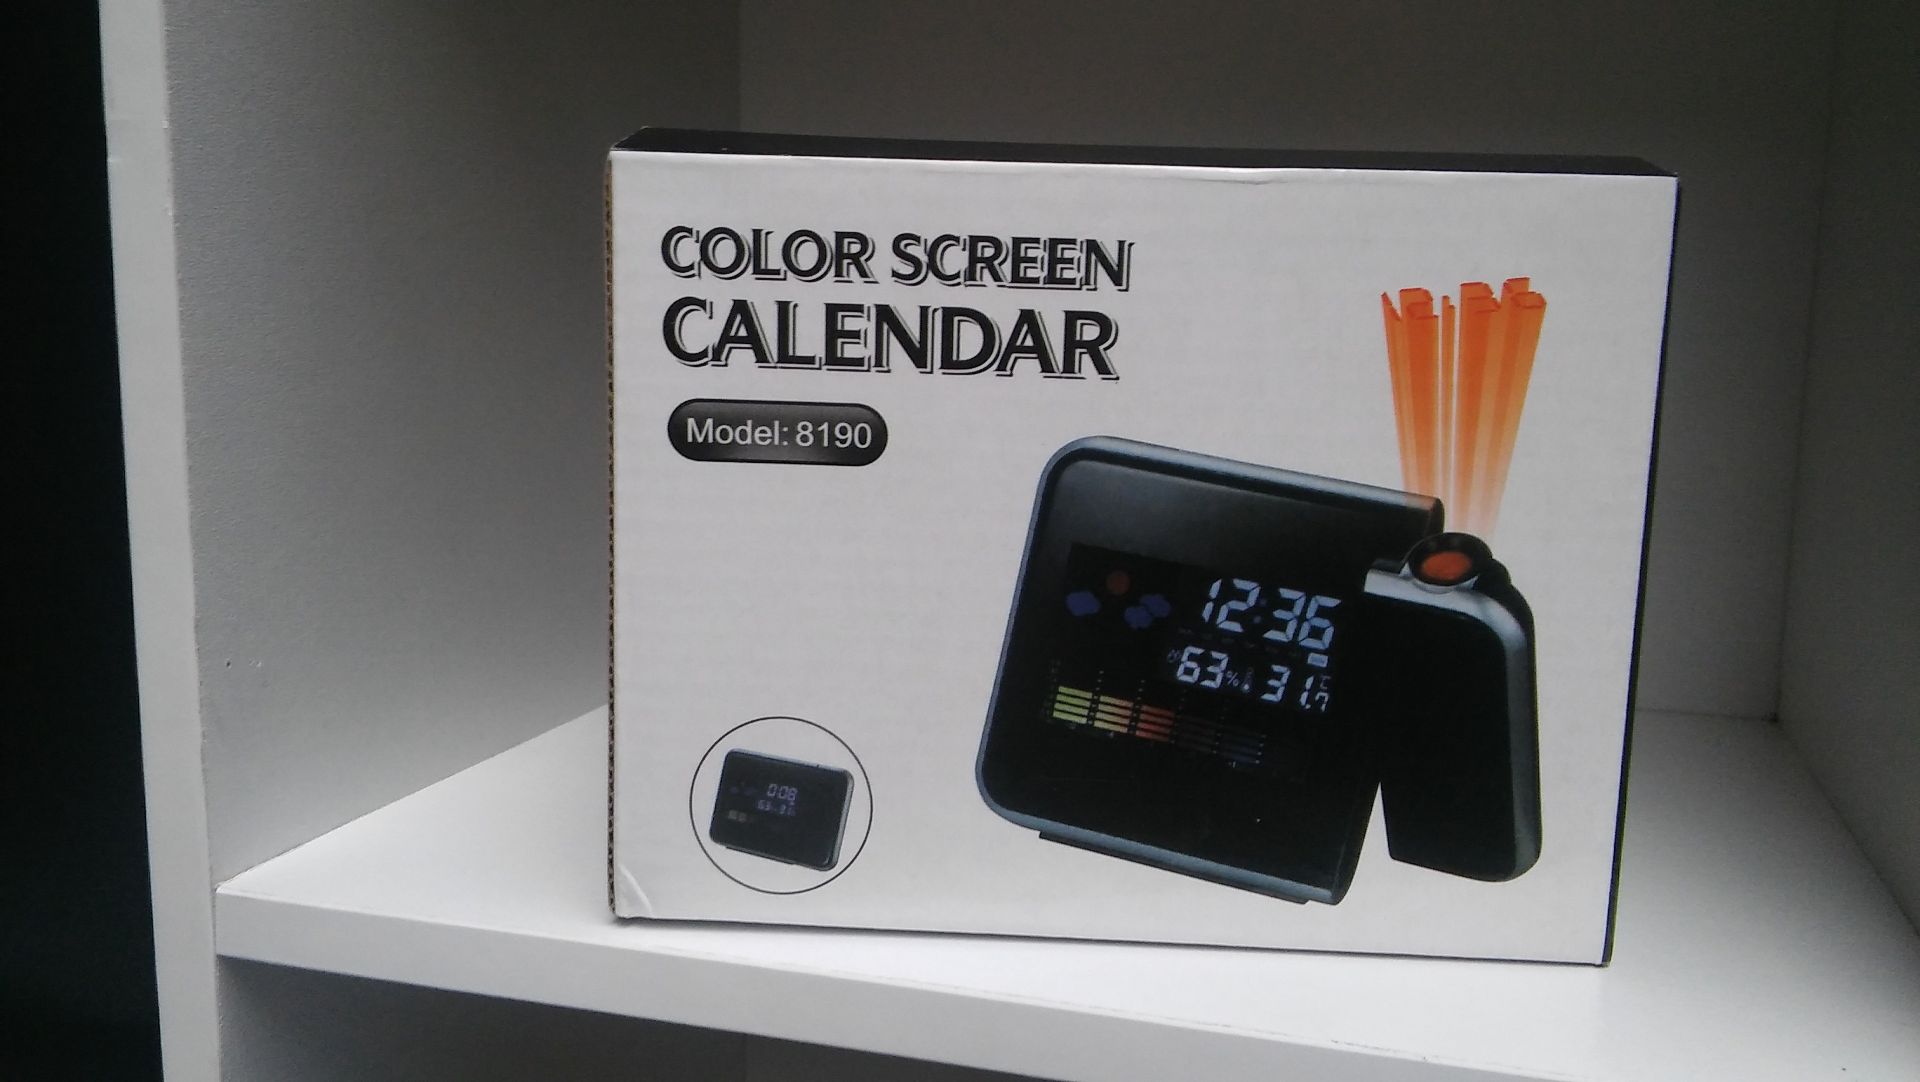 "Colorscreen" calender/weatherstation with projection alarm clock. New. RRP - £50